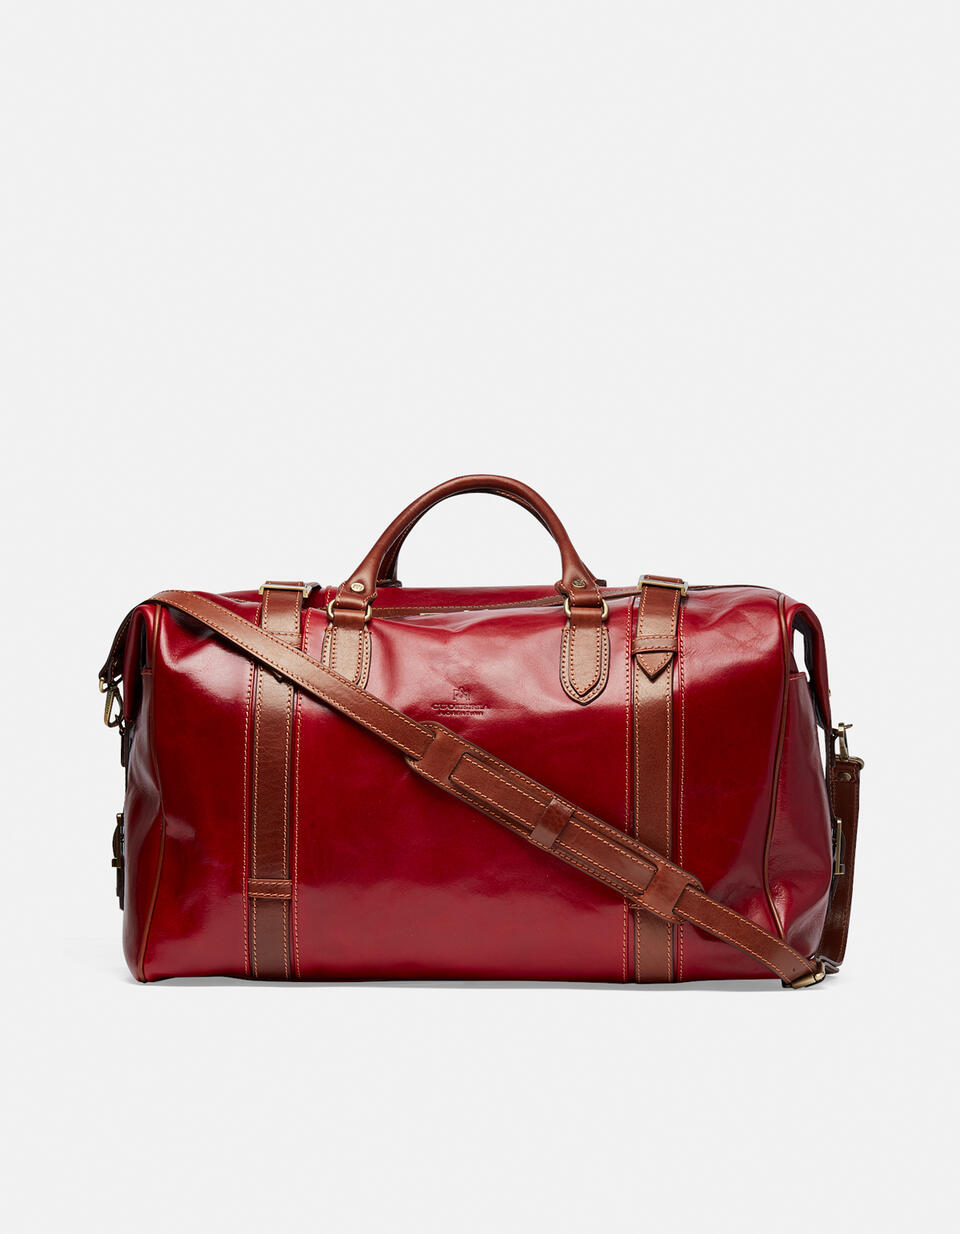 Leather travel bag with two handles - Luggage | TRAVEL BAGS ROSSOBICOLORE - Luggage | TRAVEL BAGSCuoieria Fiorentina